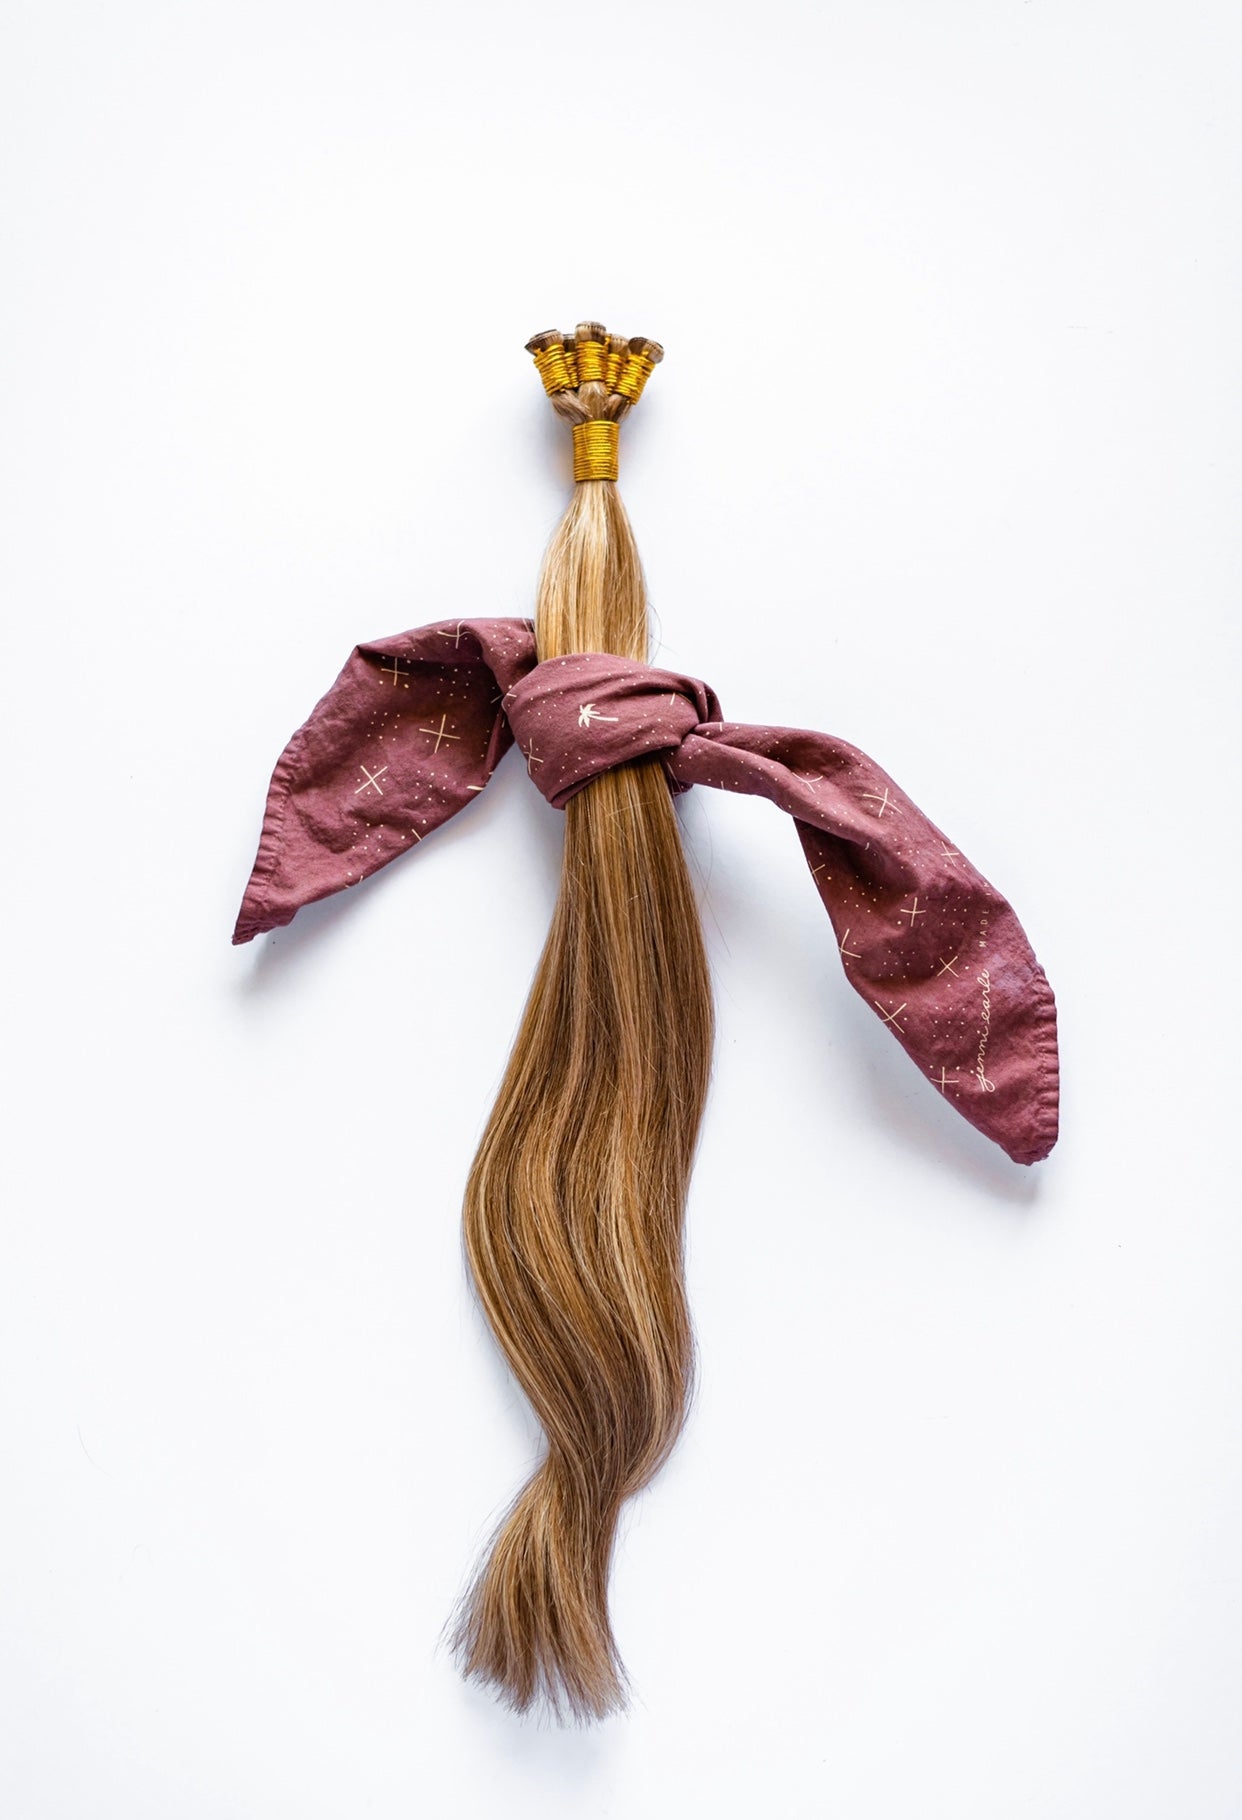 #10/16 | Hand-Tied Wefts